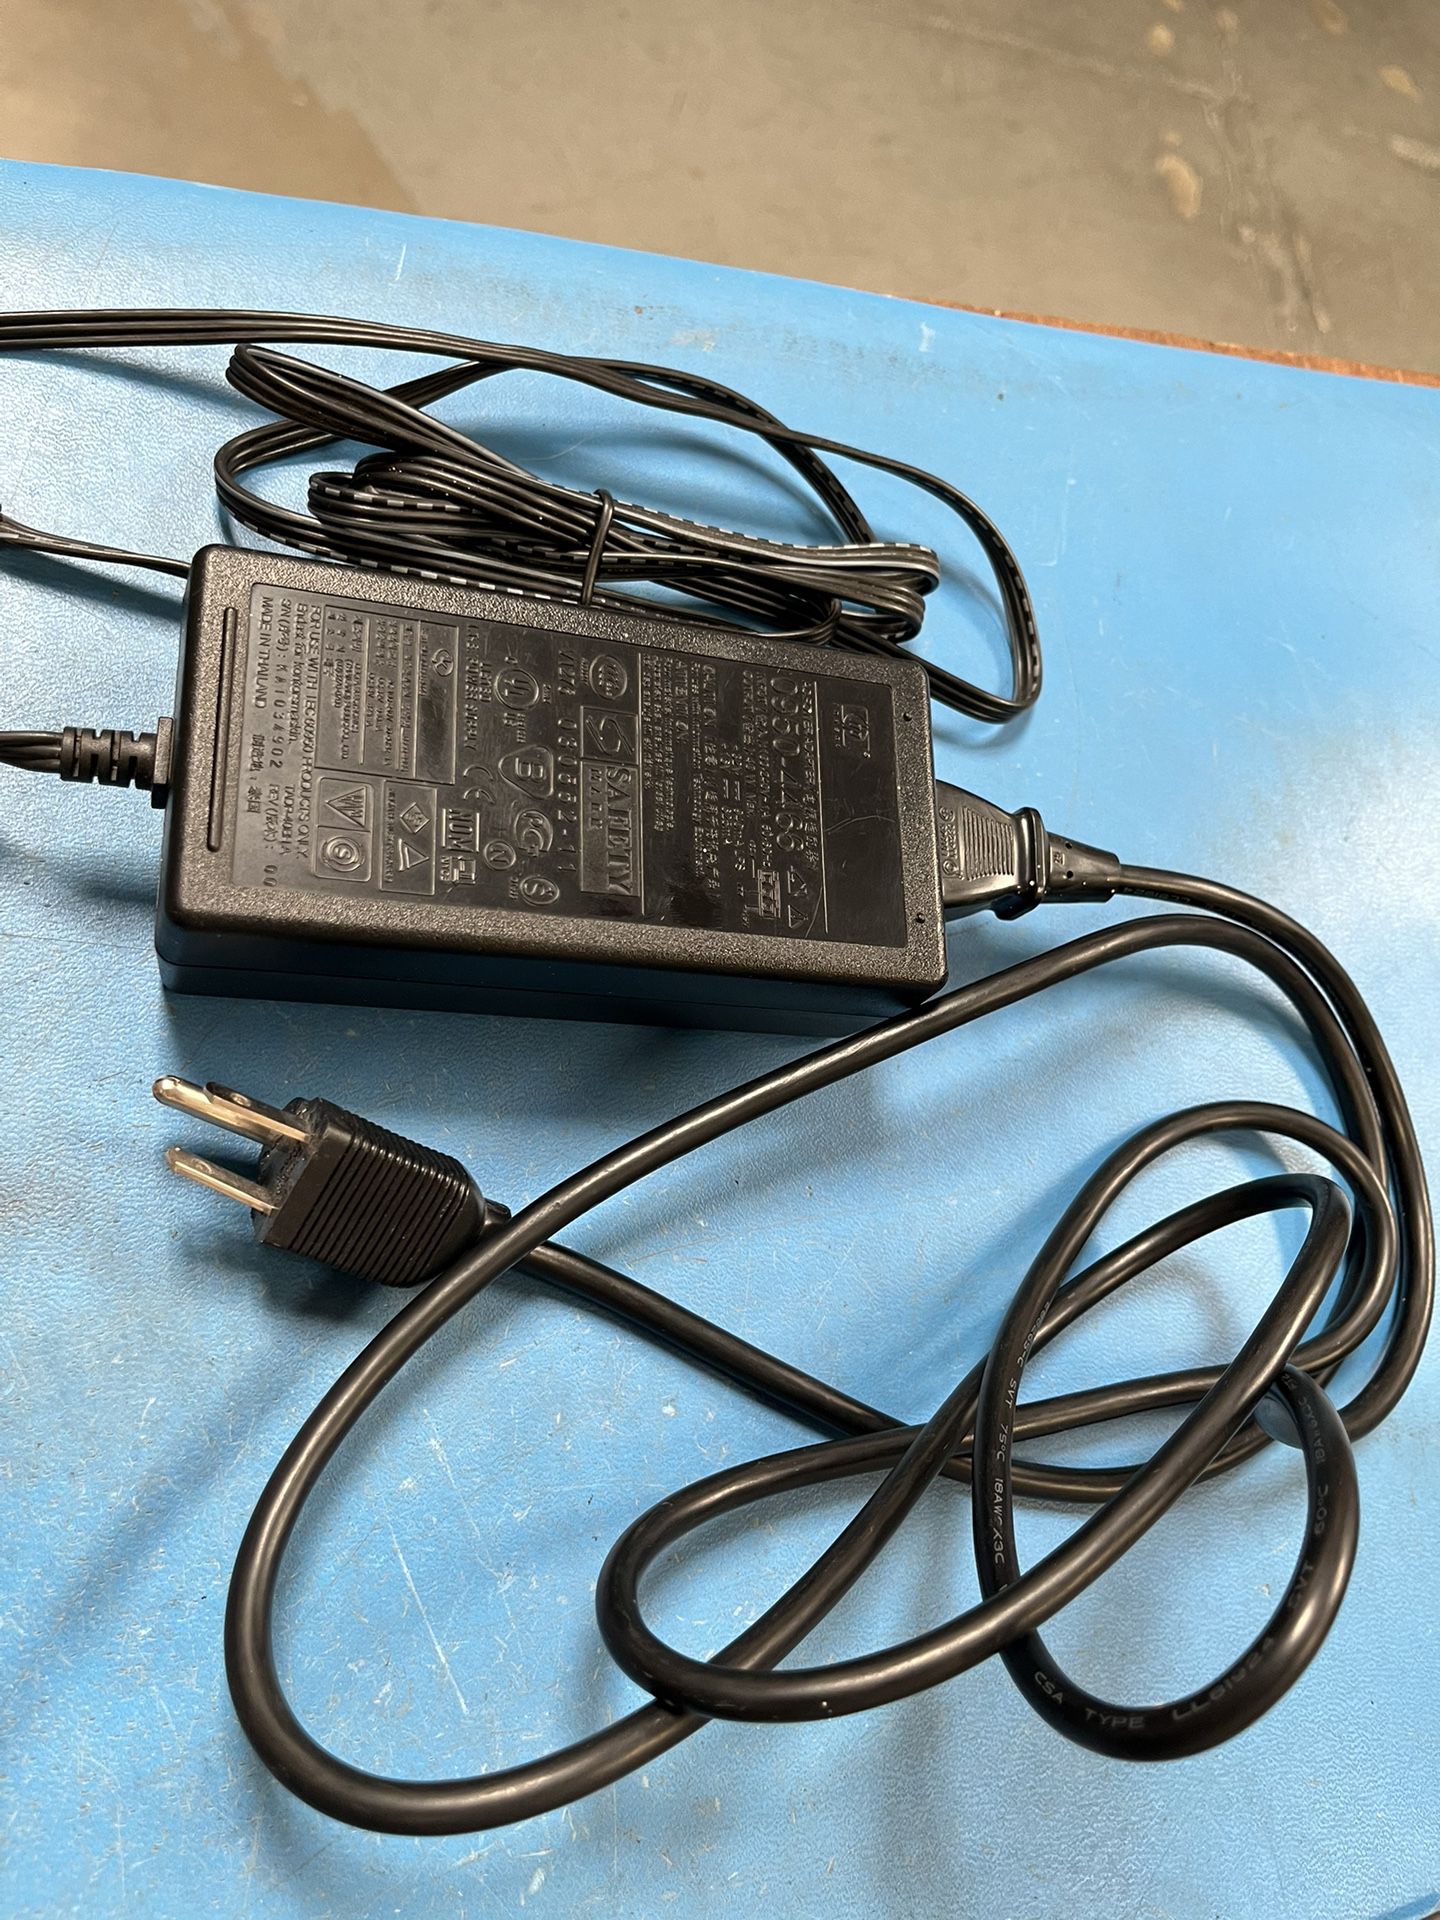 Power Adapter for HP 0(contact info removed) Printer